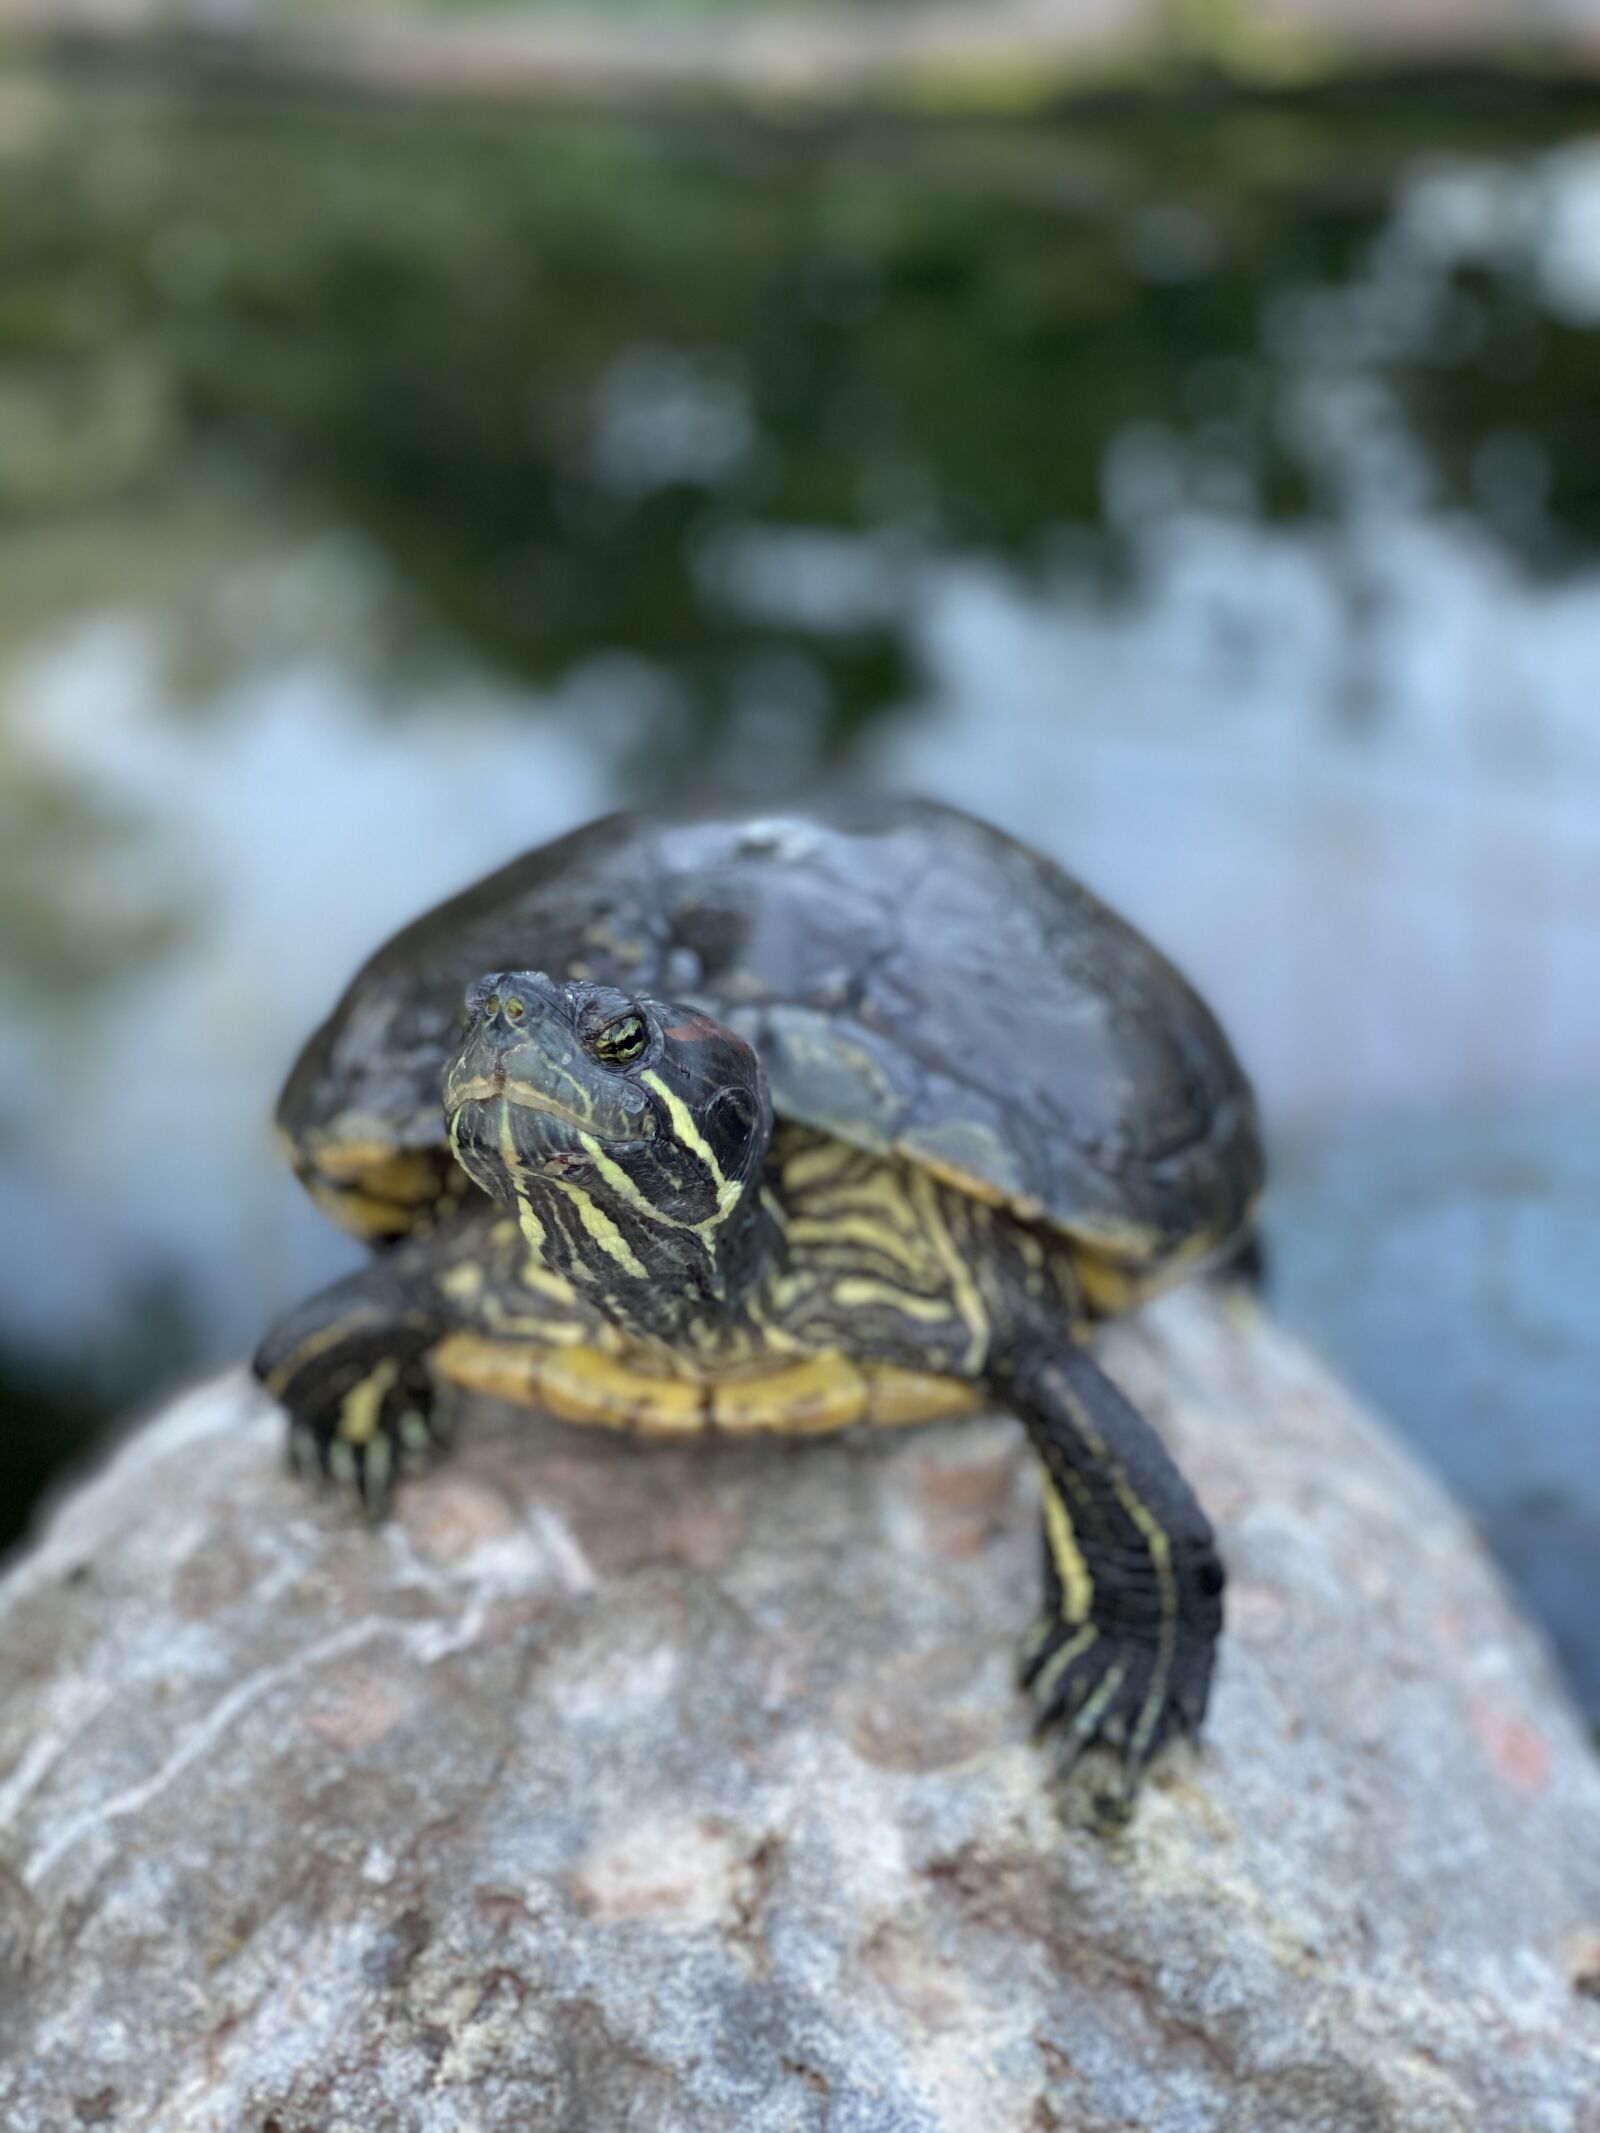 iPhone 11 Pro back dual camera 6mm f/2 sample photo. Animal, turtle, reptile photography